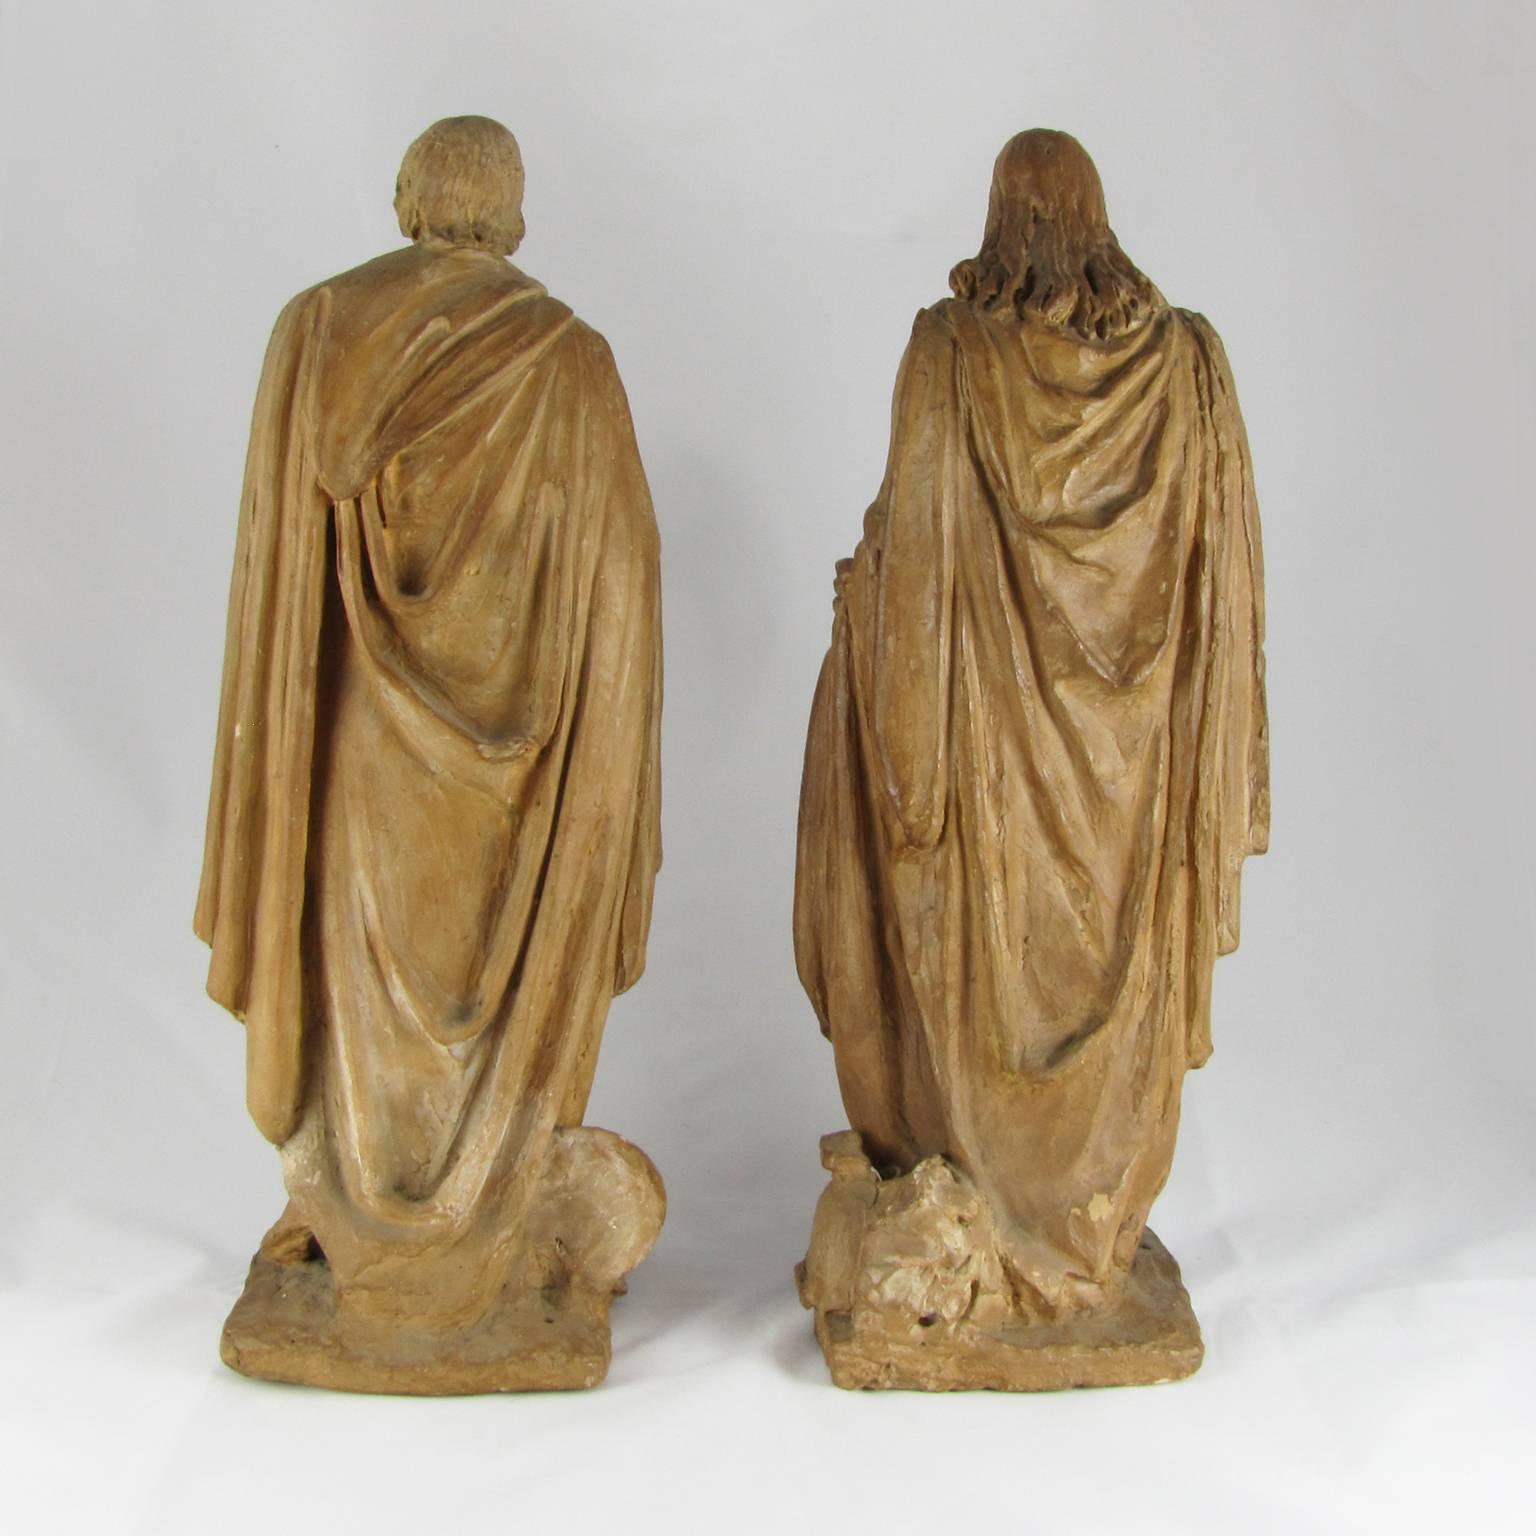 Two Early 18th Century Italian Unglazed Terracotta Sculptures Depicting Saints 2